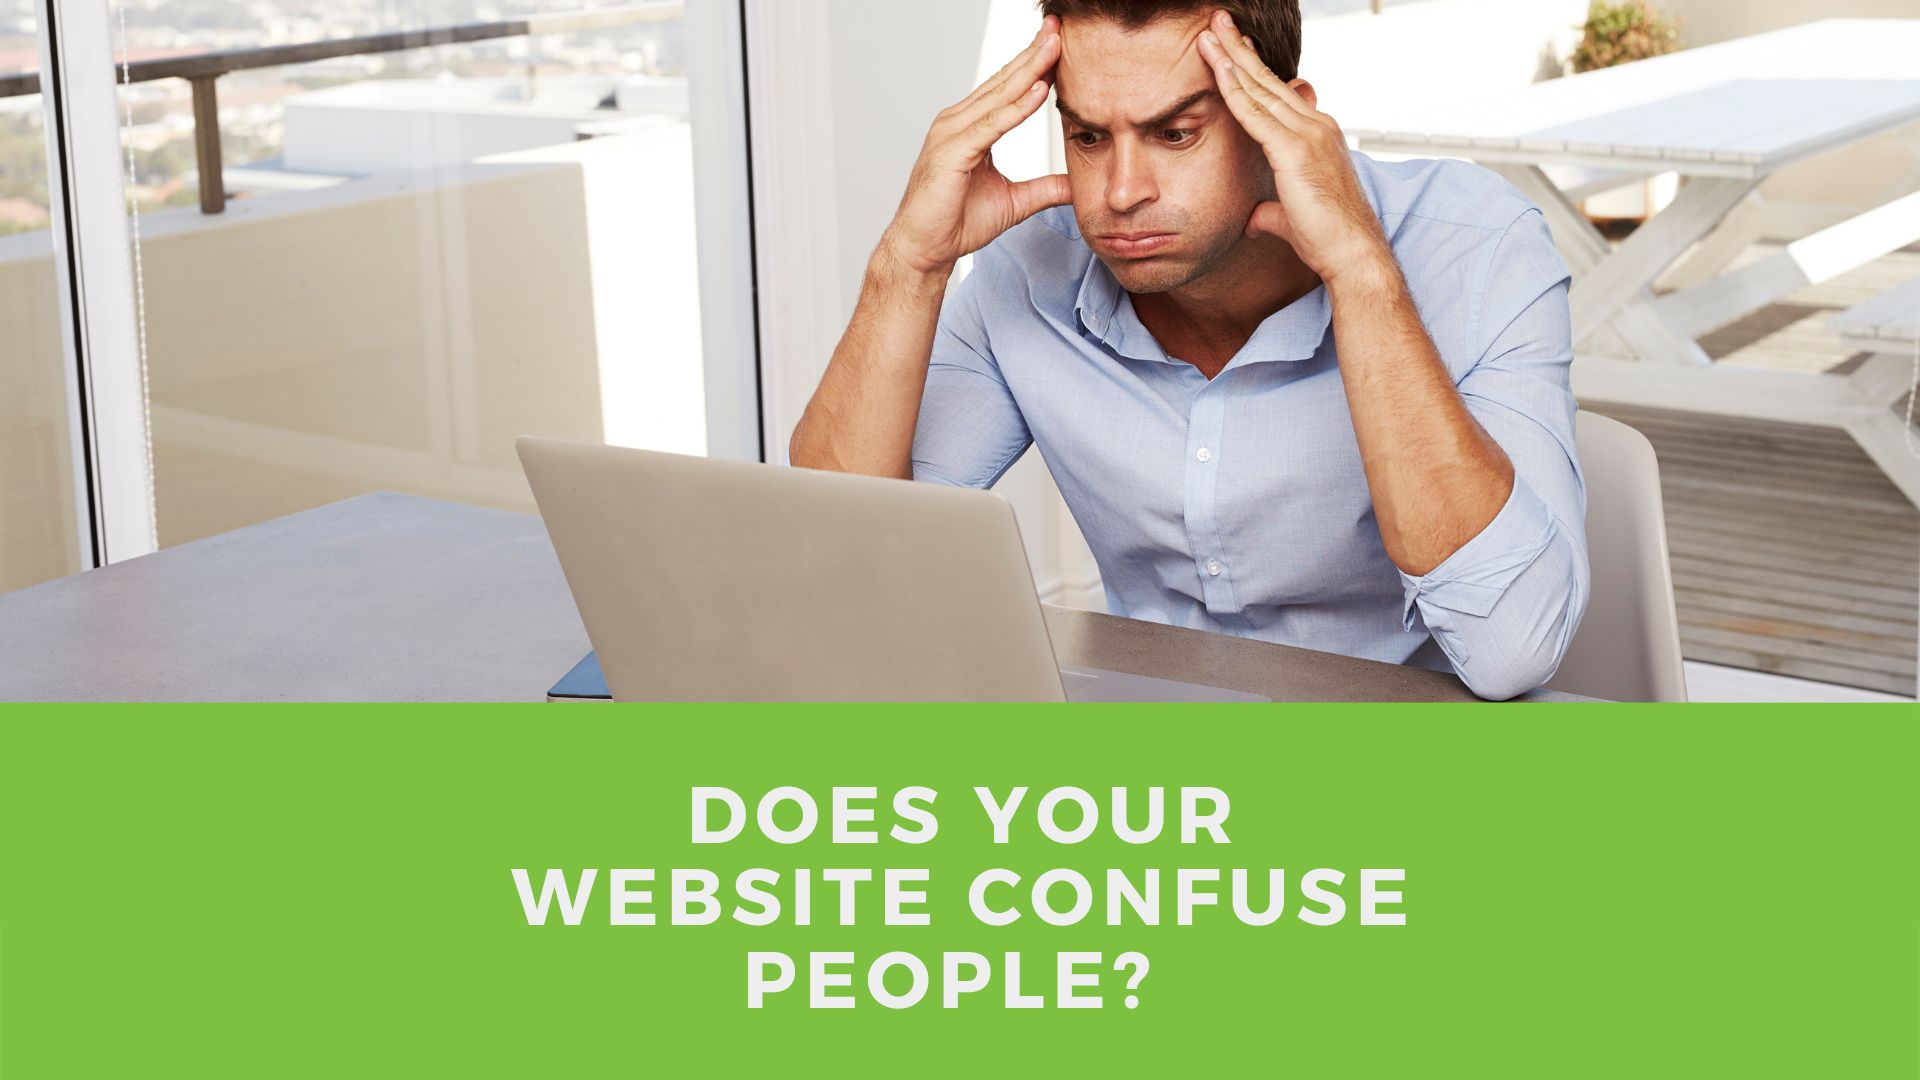 Does your website confuse people? Here are some tips to make your website more effective.